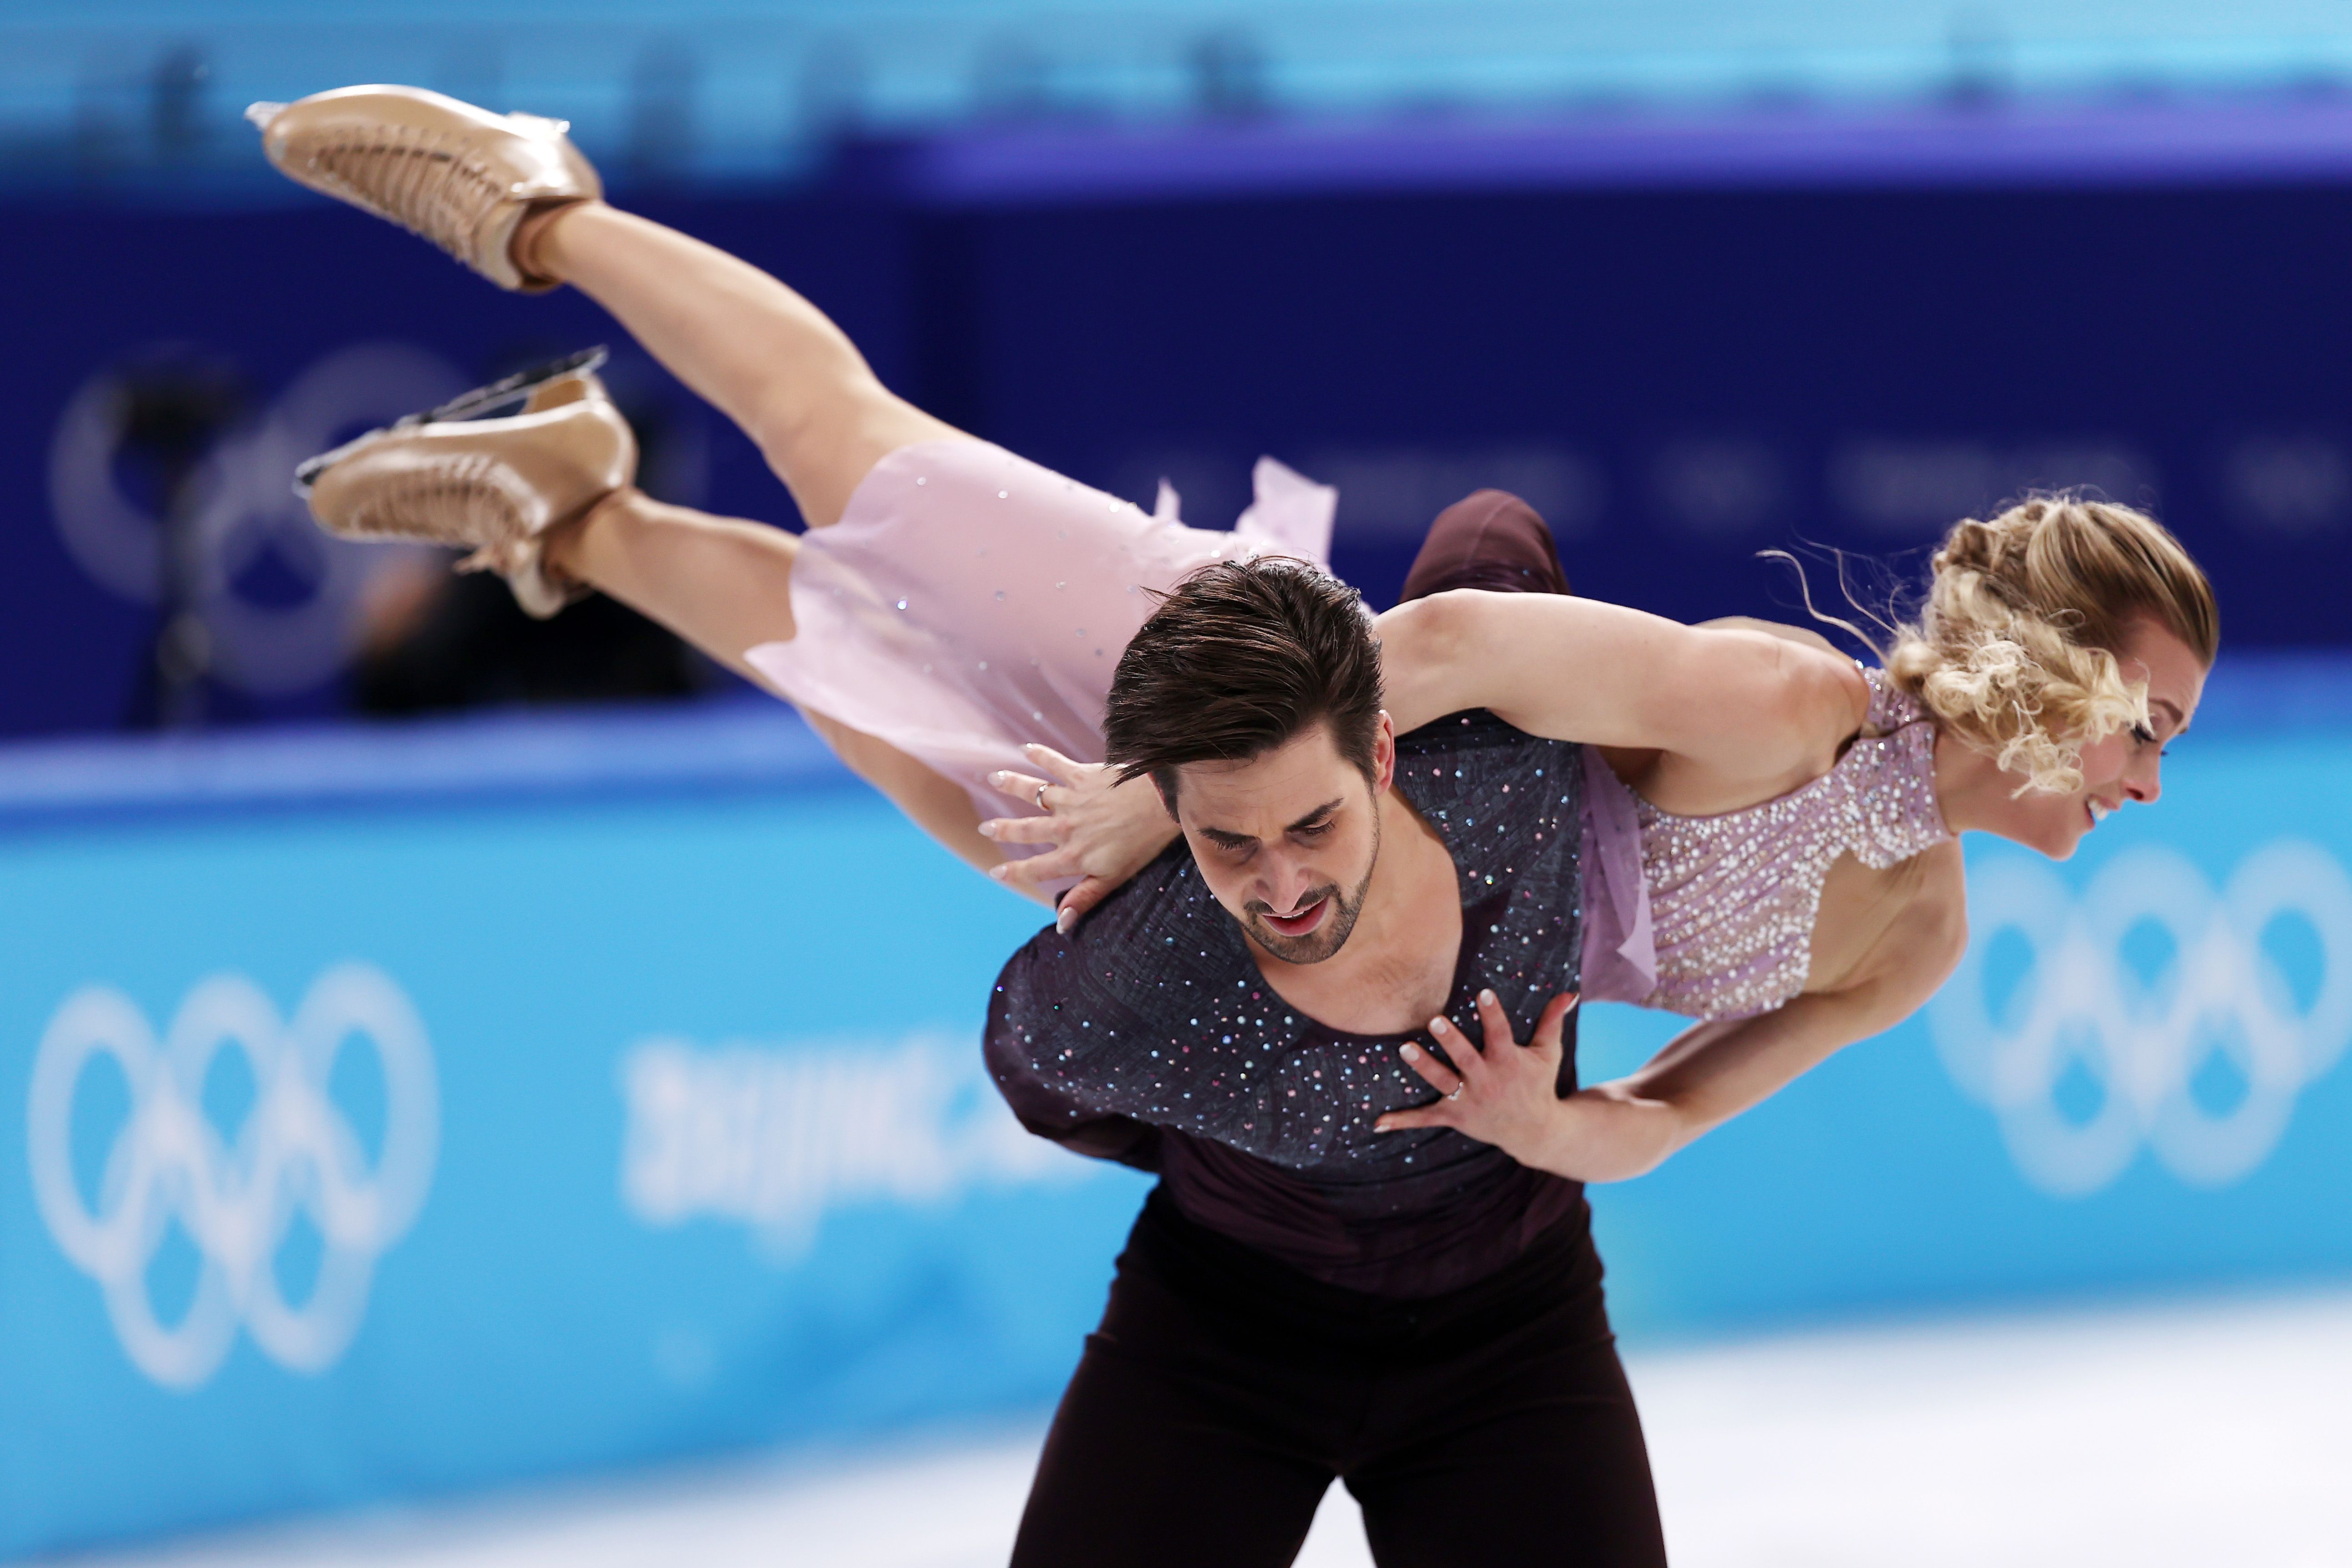 Madison Hubbell and Zachary Donohue of Team United States skate during the Ice Dance Free Dance at the Winter Olympic Games at Capital Indoor Stadium on February 14